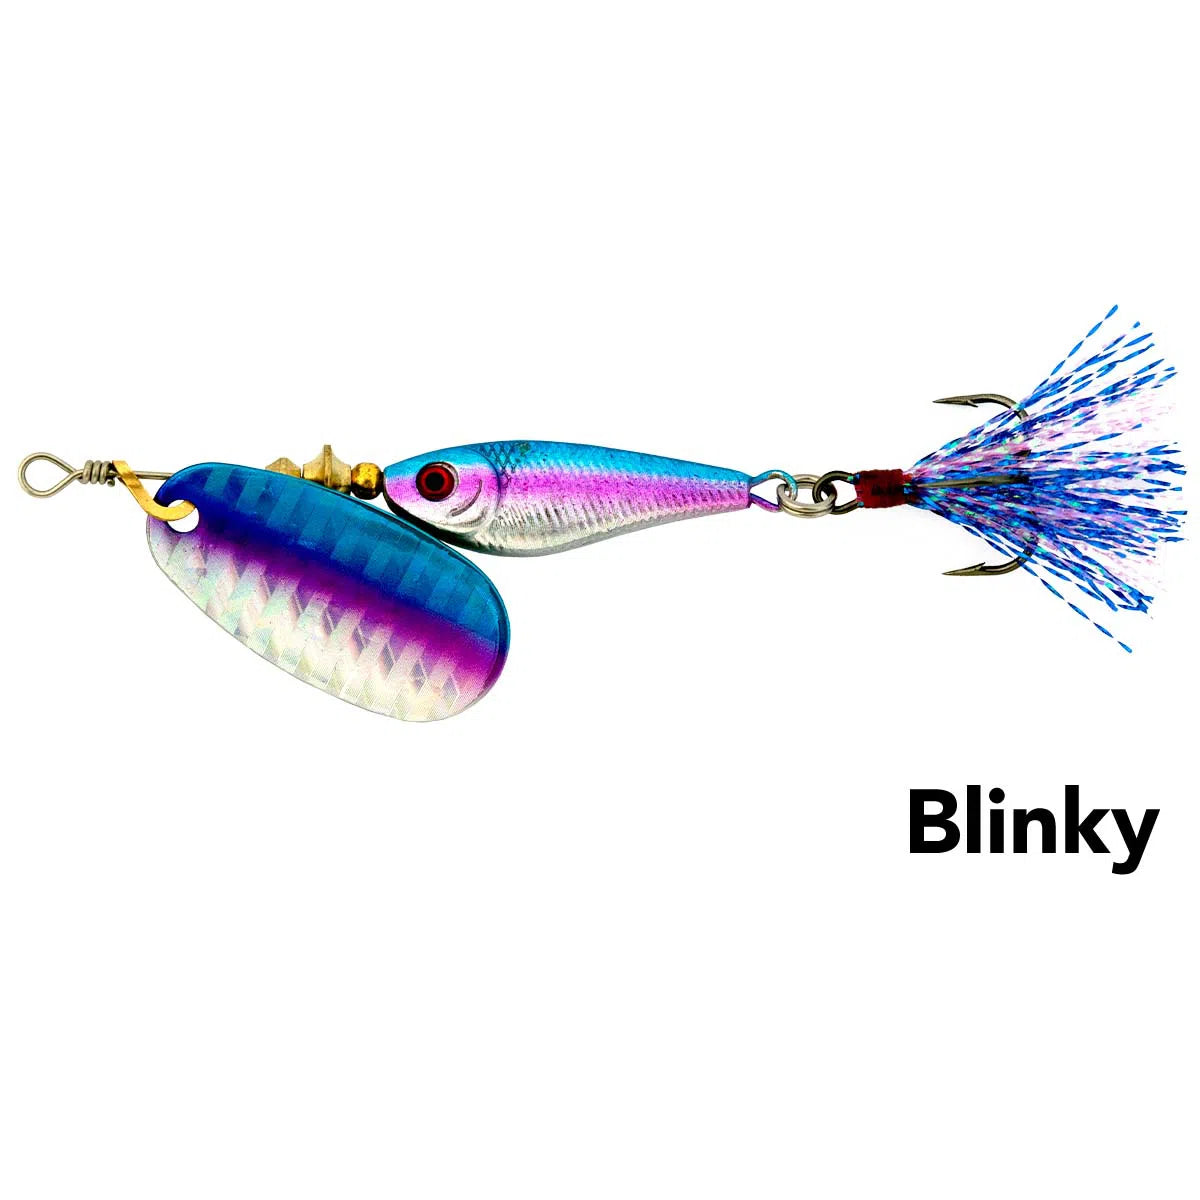 Black Magic Spinmax Lure-Lure - Spinnerbaits & Spinners-Black Magic-Blinky-9.3g-Fishing Station